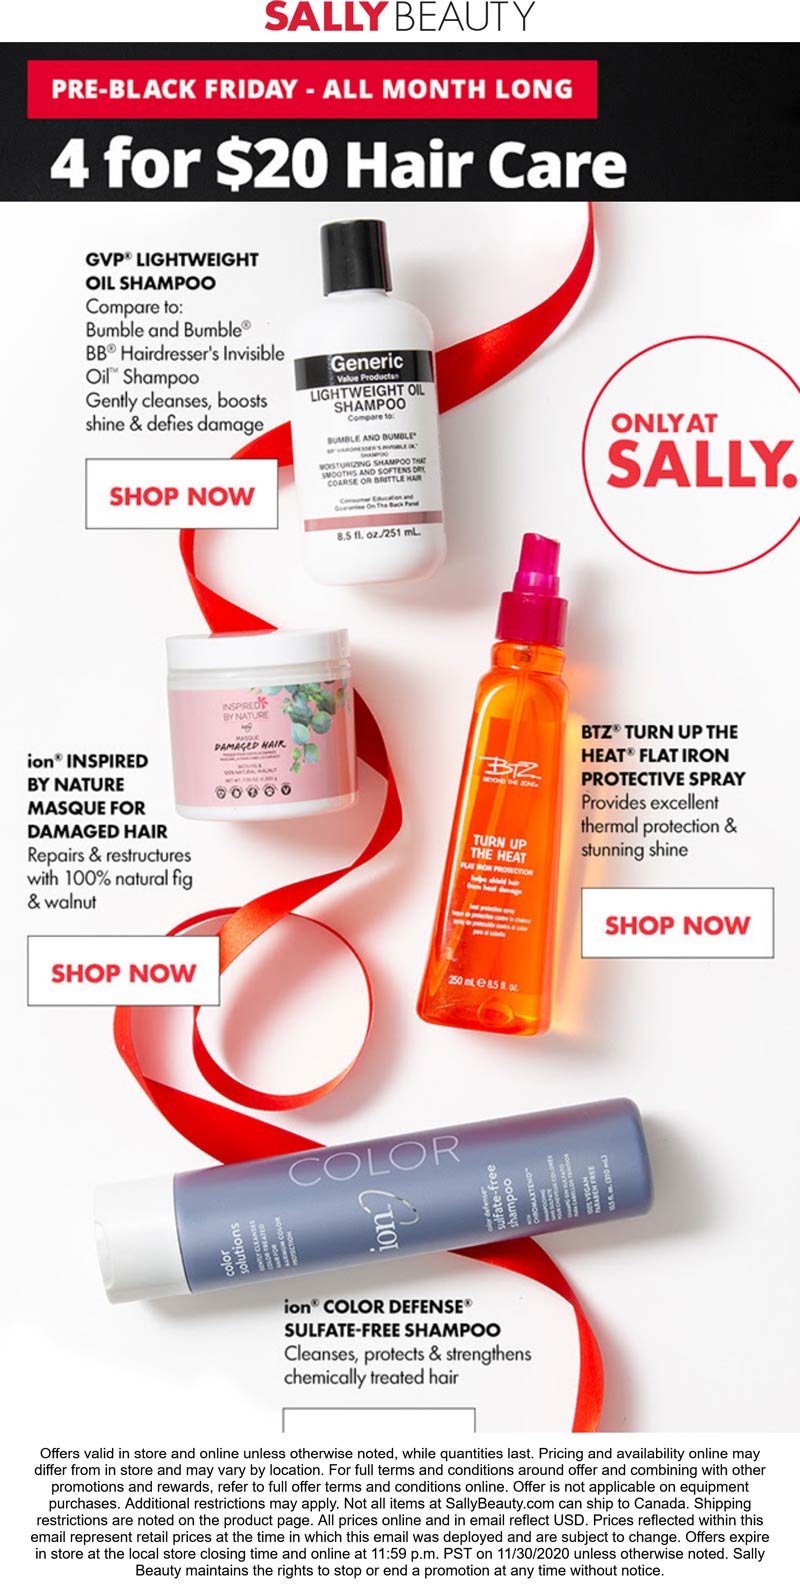 Sally Beauty Coupon Code In Store Best Sally Beauty Promo Codes & Deals.